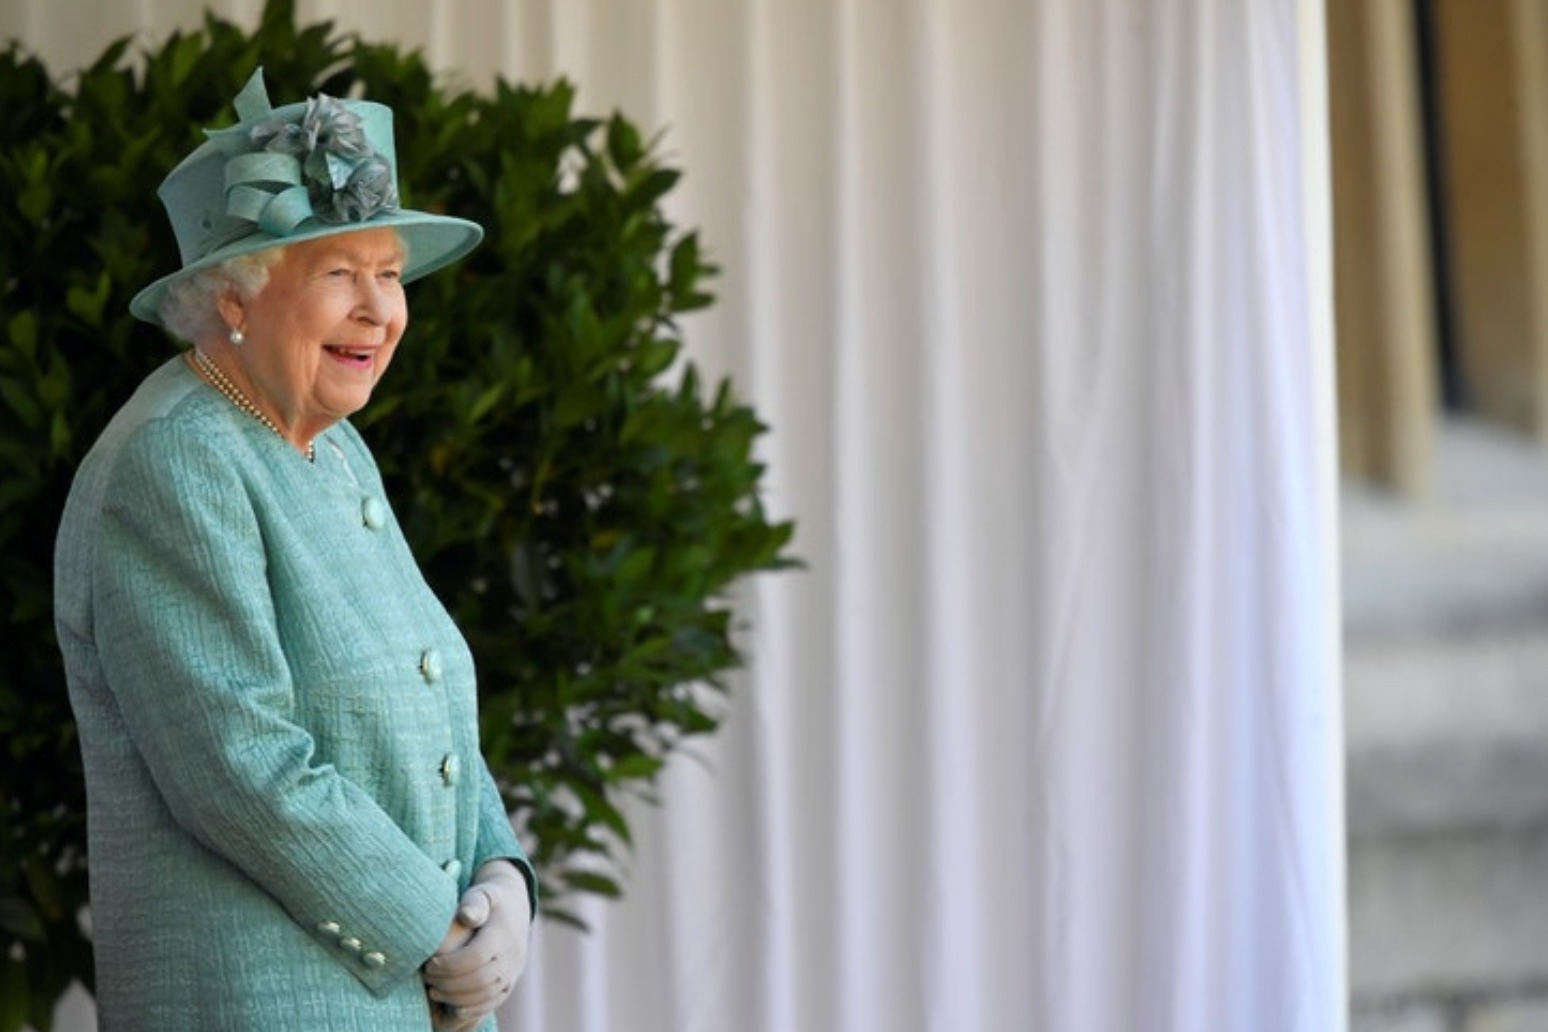 Milestones and events of the Queen’s long reign 